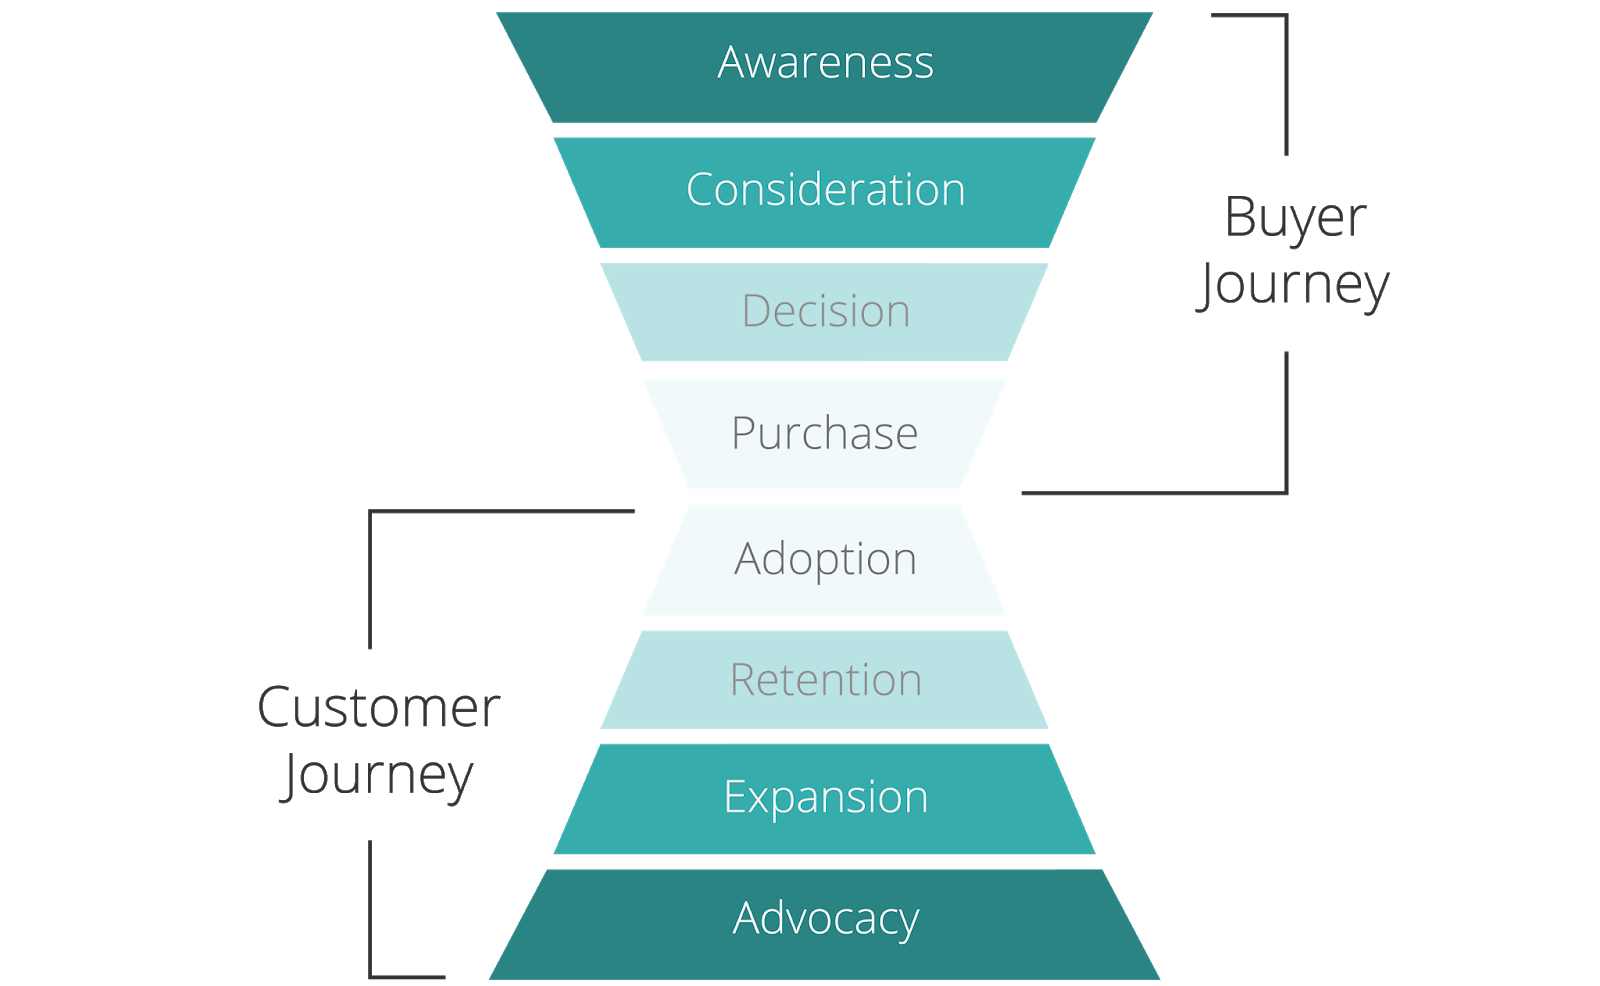 A visualization of the customer's buying journey. The steps in the funnel are Awareness, Consideration, Decision, Purchase, Adoption, Retention, Expansion, and Advocacy.